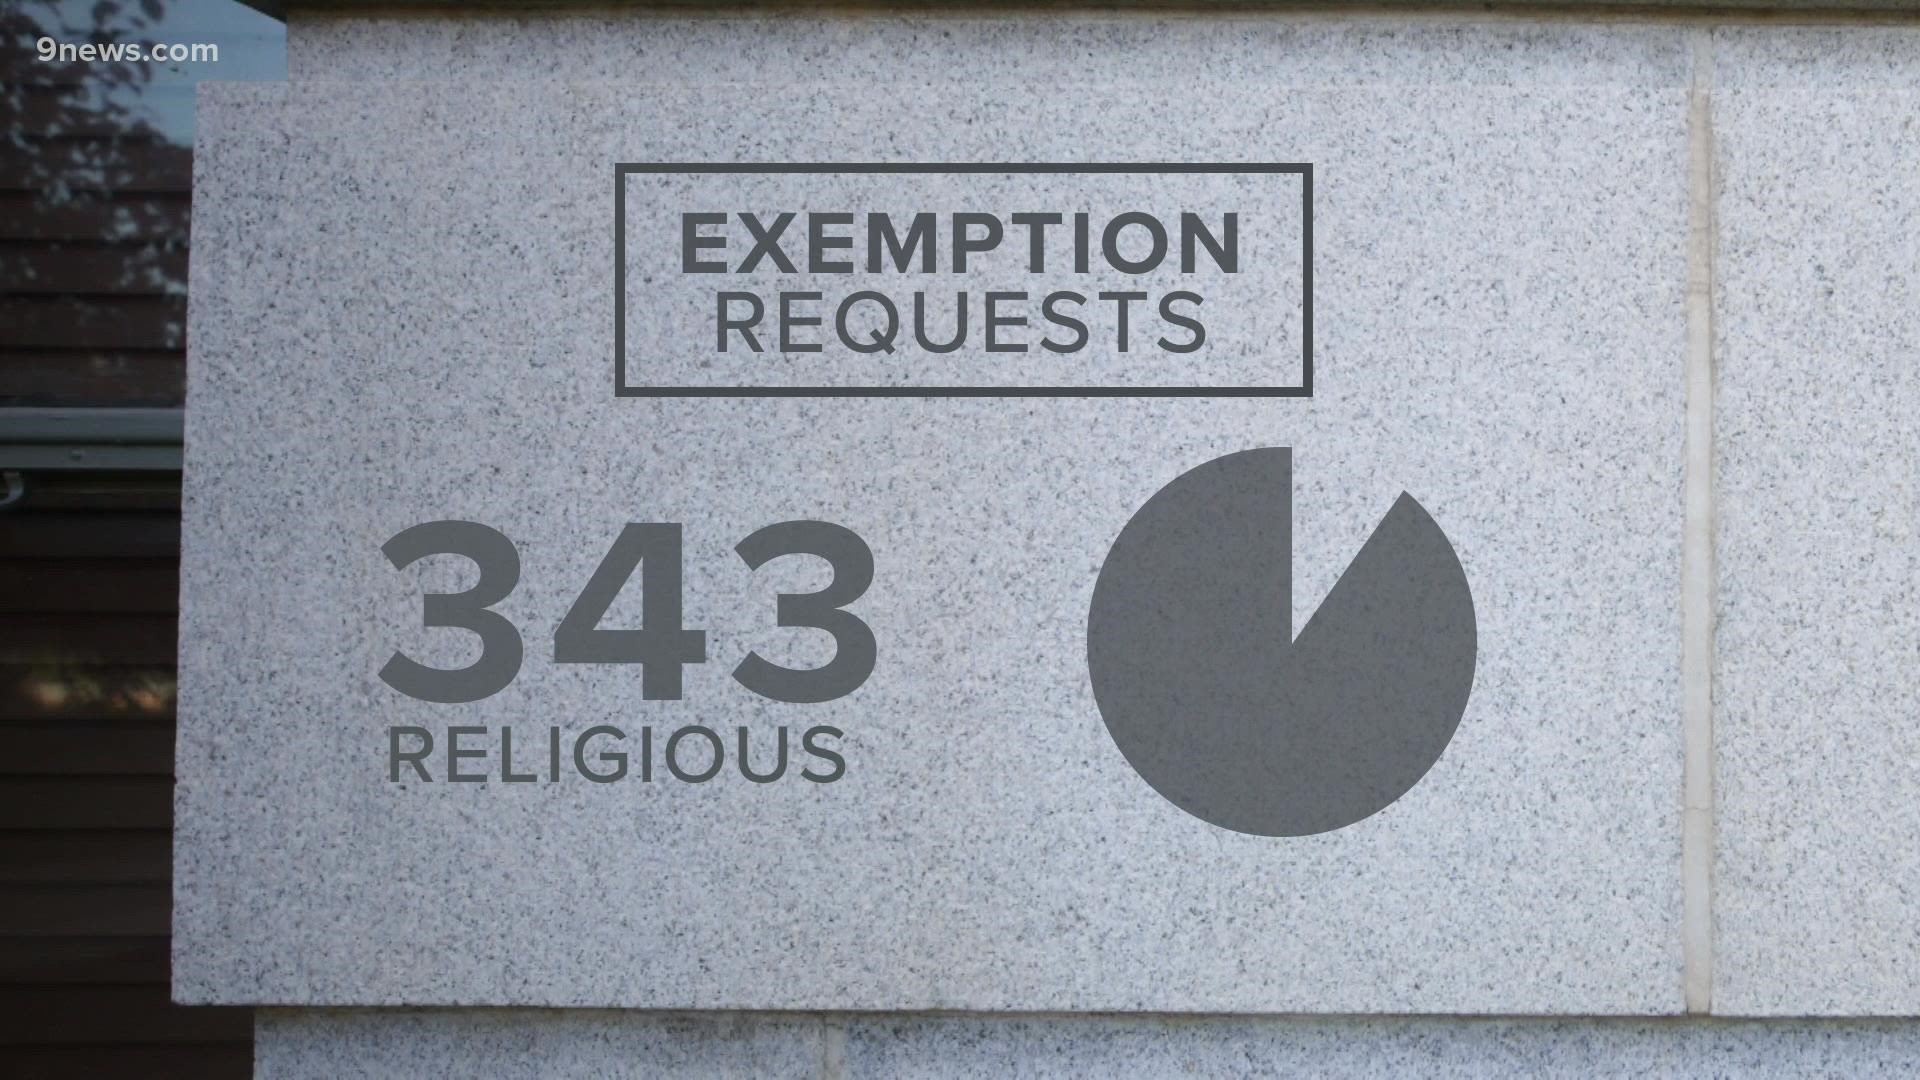 The vast majority of requested exemptions from the vaccine mandate were granted, mostly on religious claims.